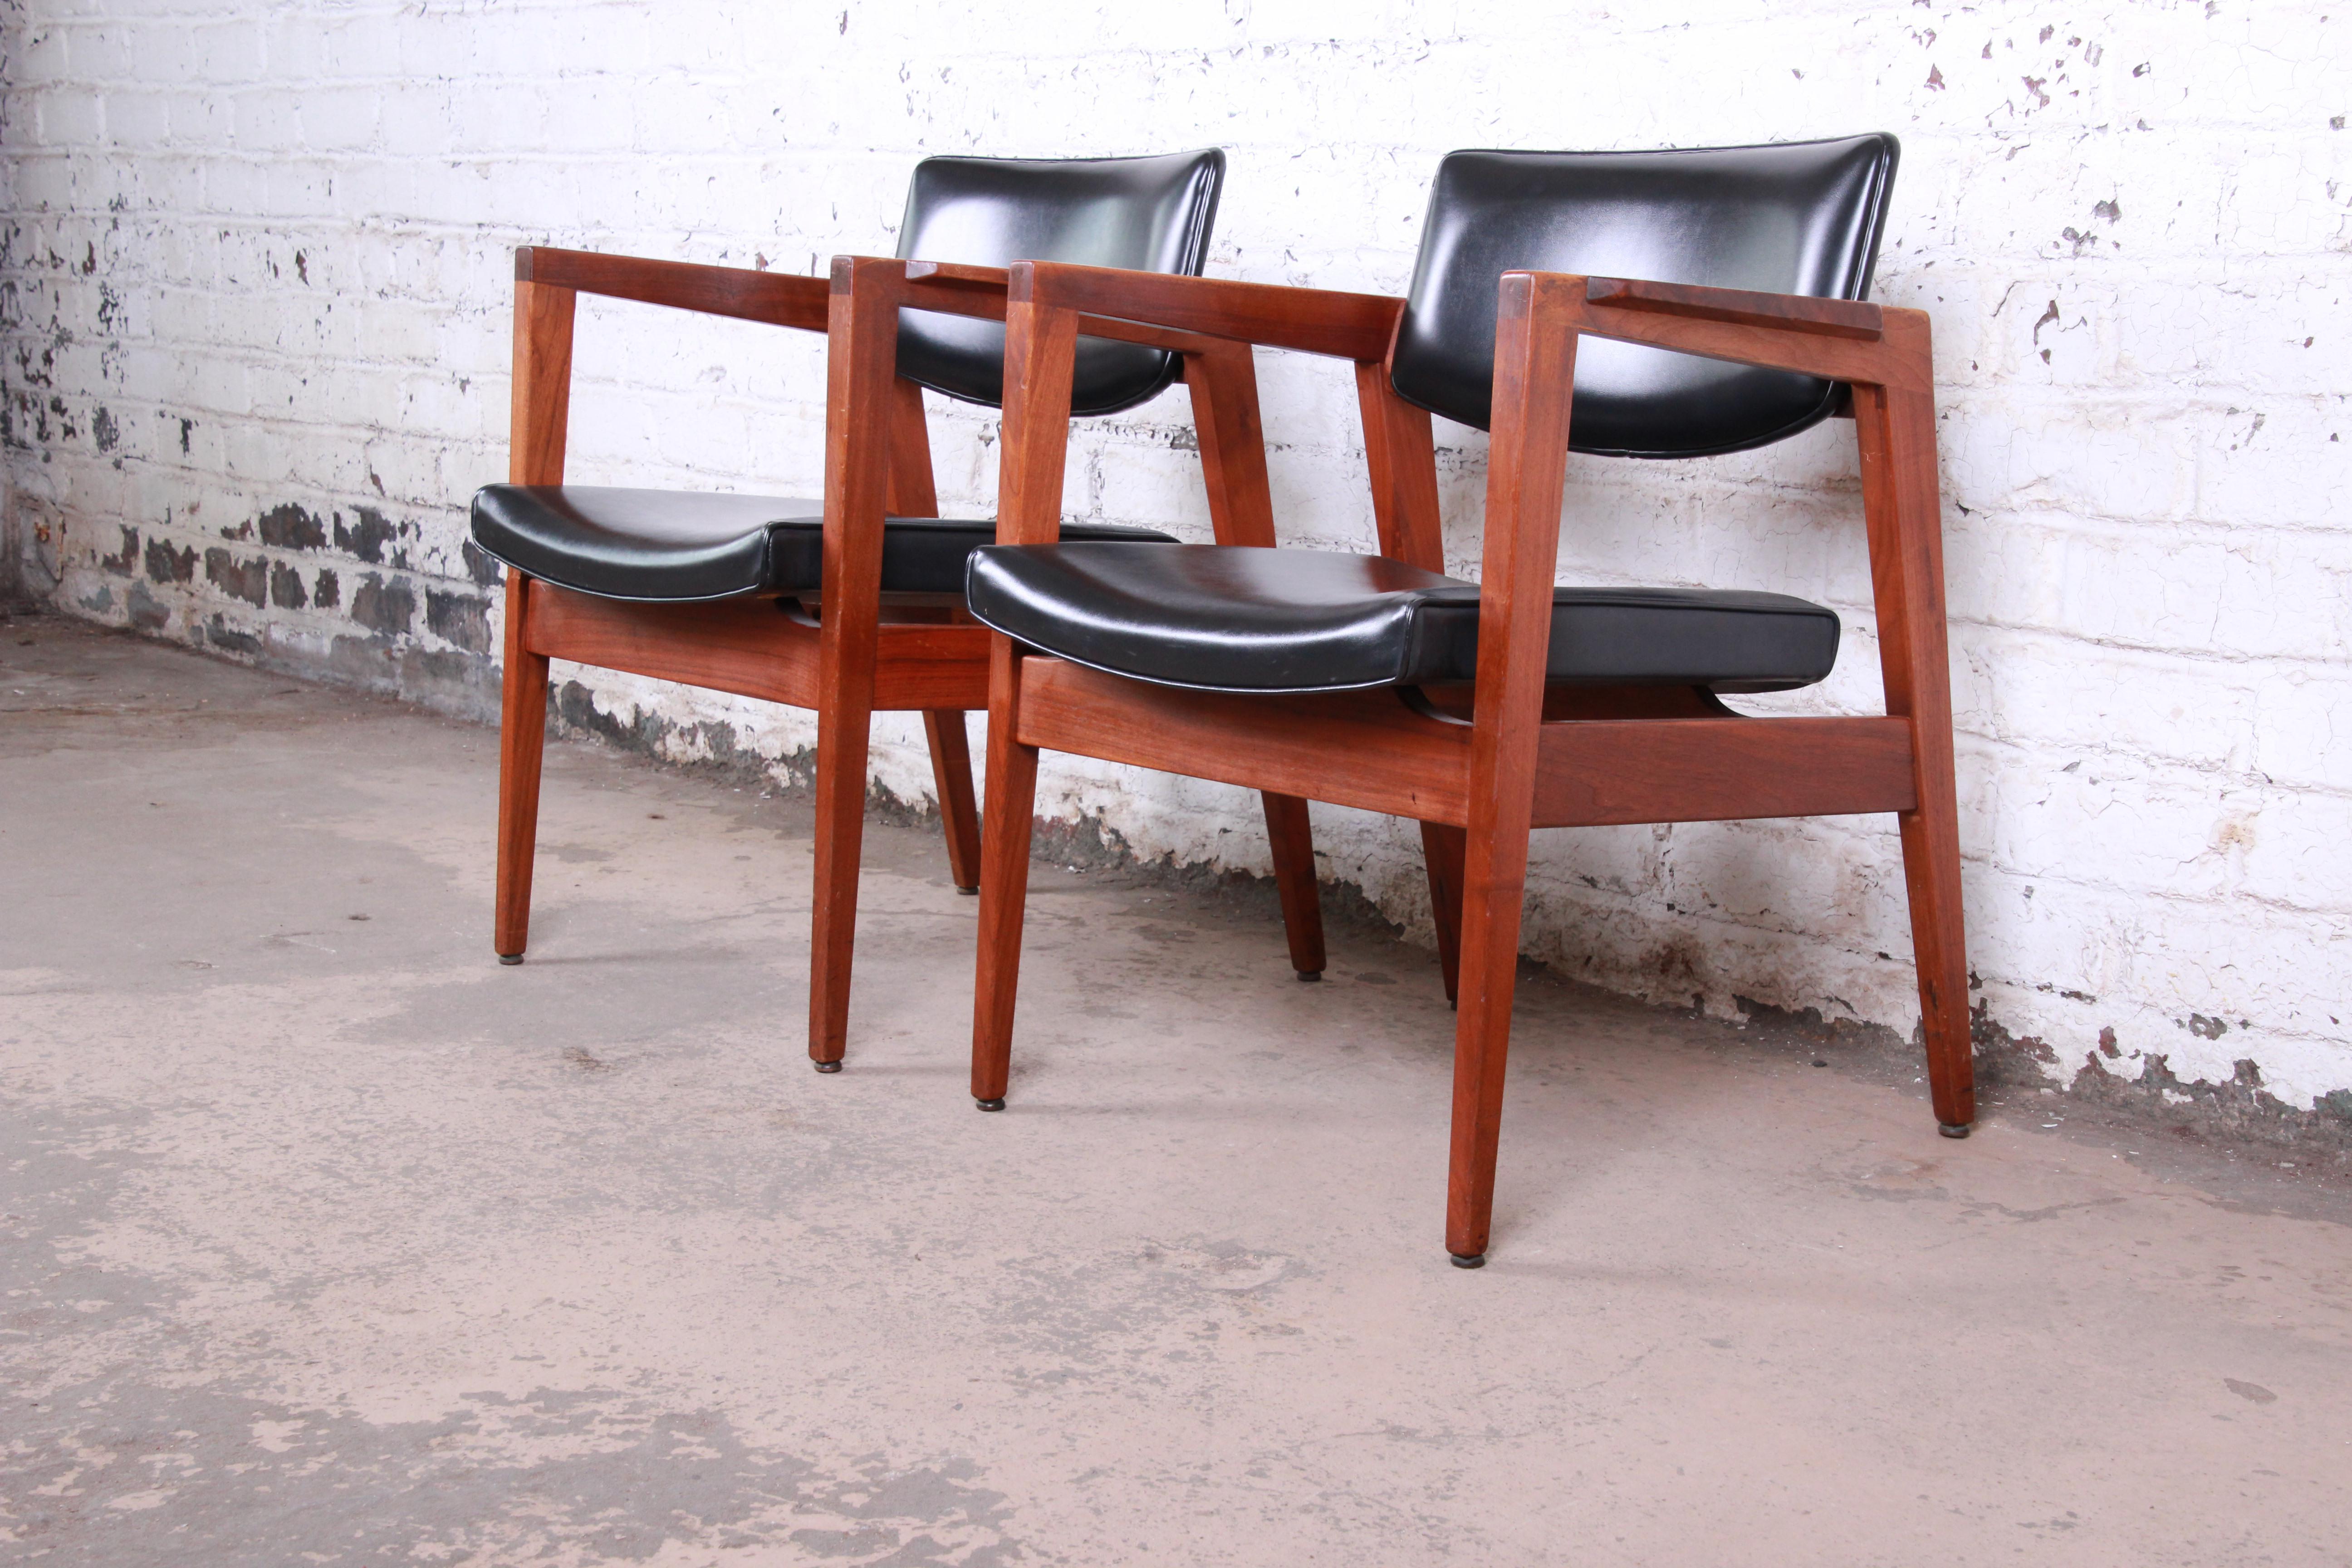 A gorgeous pair of Jens Risom style mid-century modern walnut lounge chairs by the Gunlocke Chair Co. of New York, circa 1960. The chairs feature sleek sculpted solid walnut frames, with a floating seat and back in original black vinyl. The original